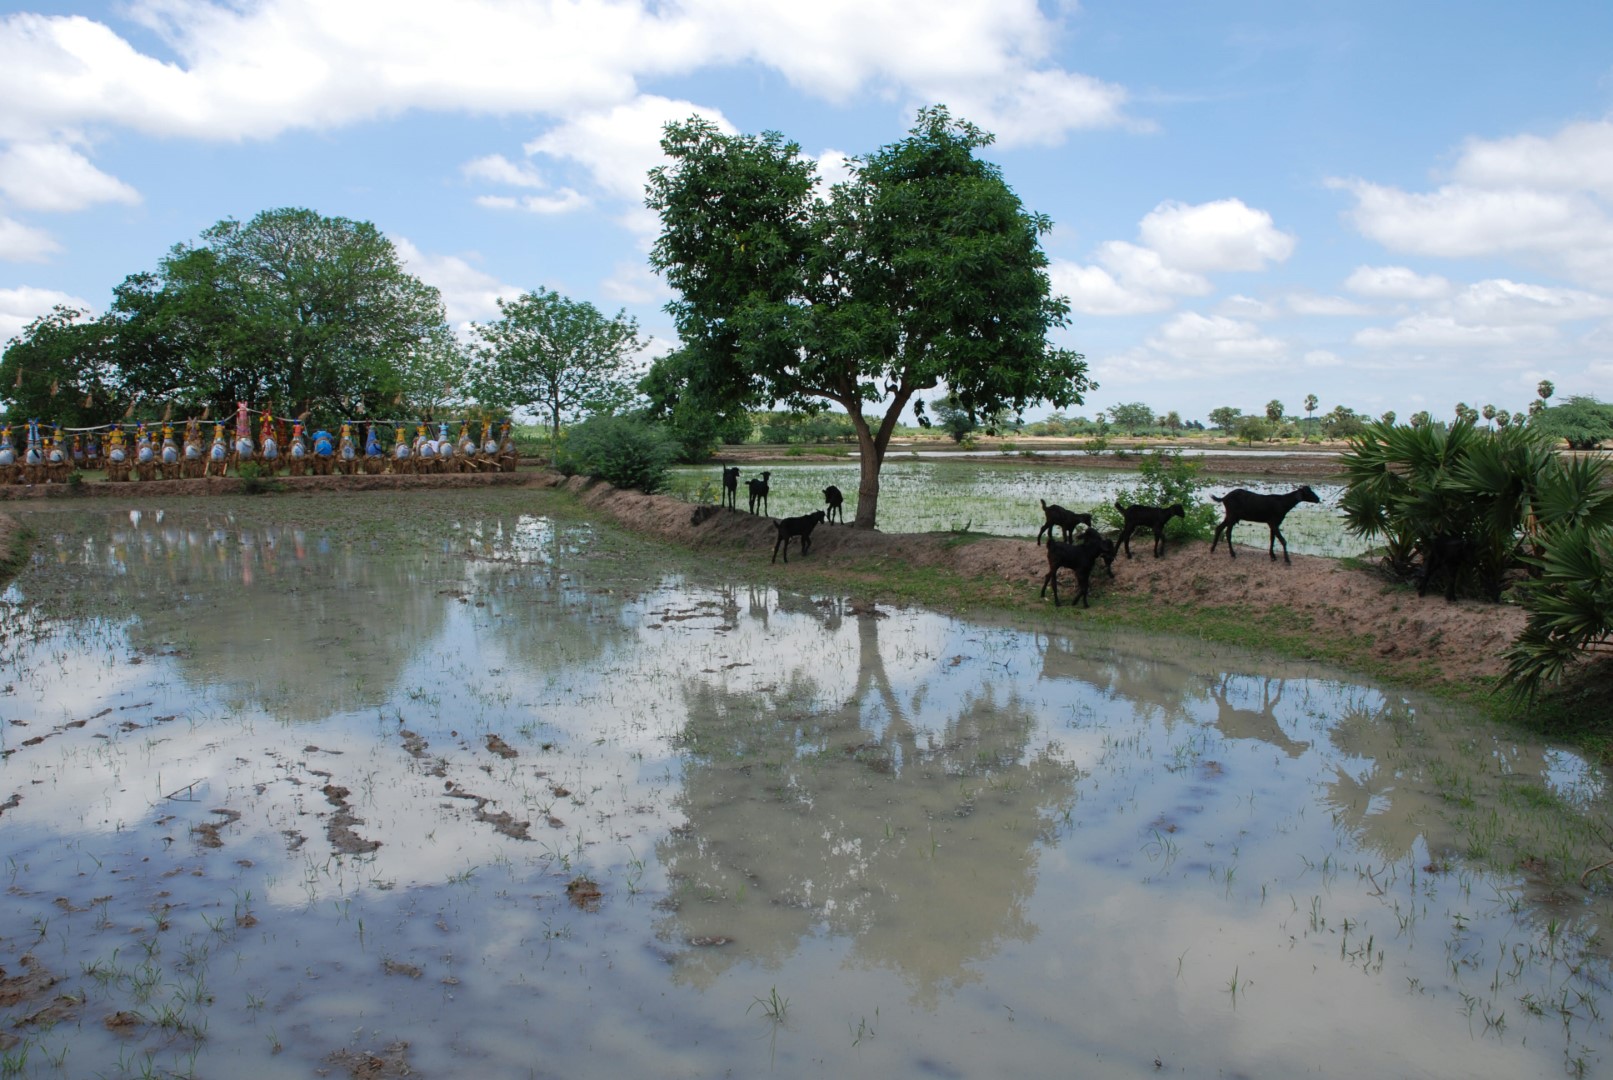 <span style="font-weight:normal;">After leaving the potters' quarters, and before being carried into the shrine, the pieces are placed on the "intermediary grounds," in this case, near flooded paddy fields.</span>